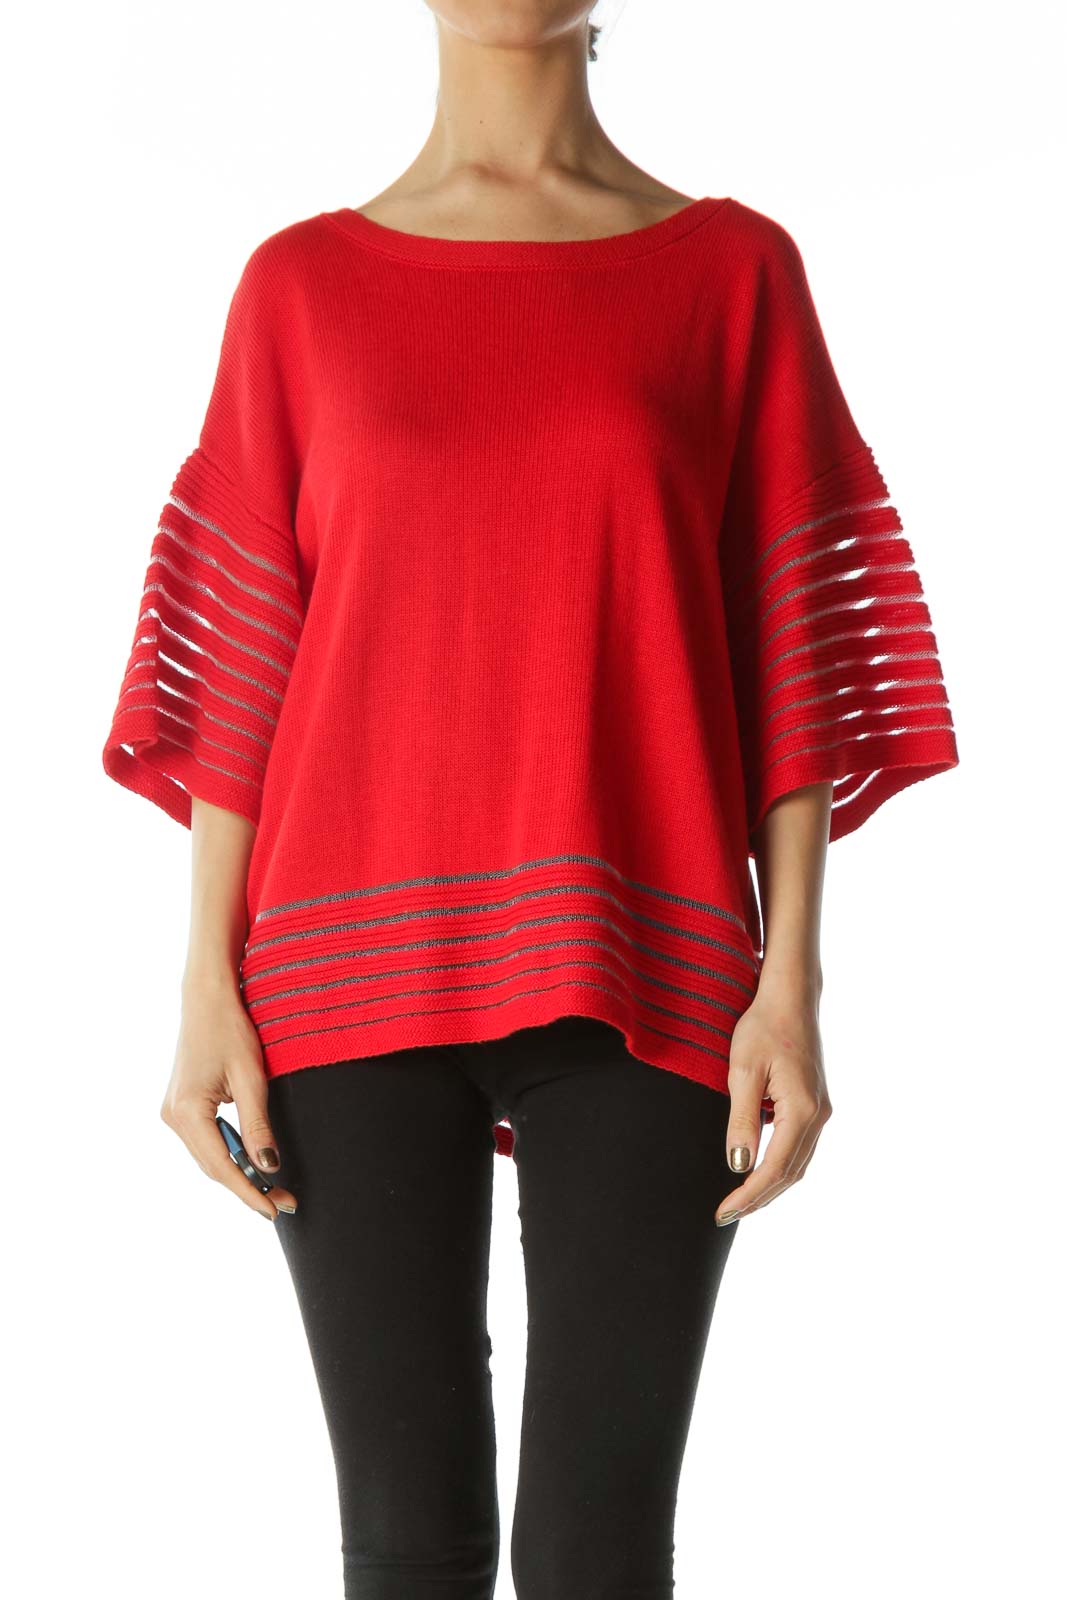 Bright Red Over-Sized Short-Sleeve Knit With Lace Contrast on Hem Front